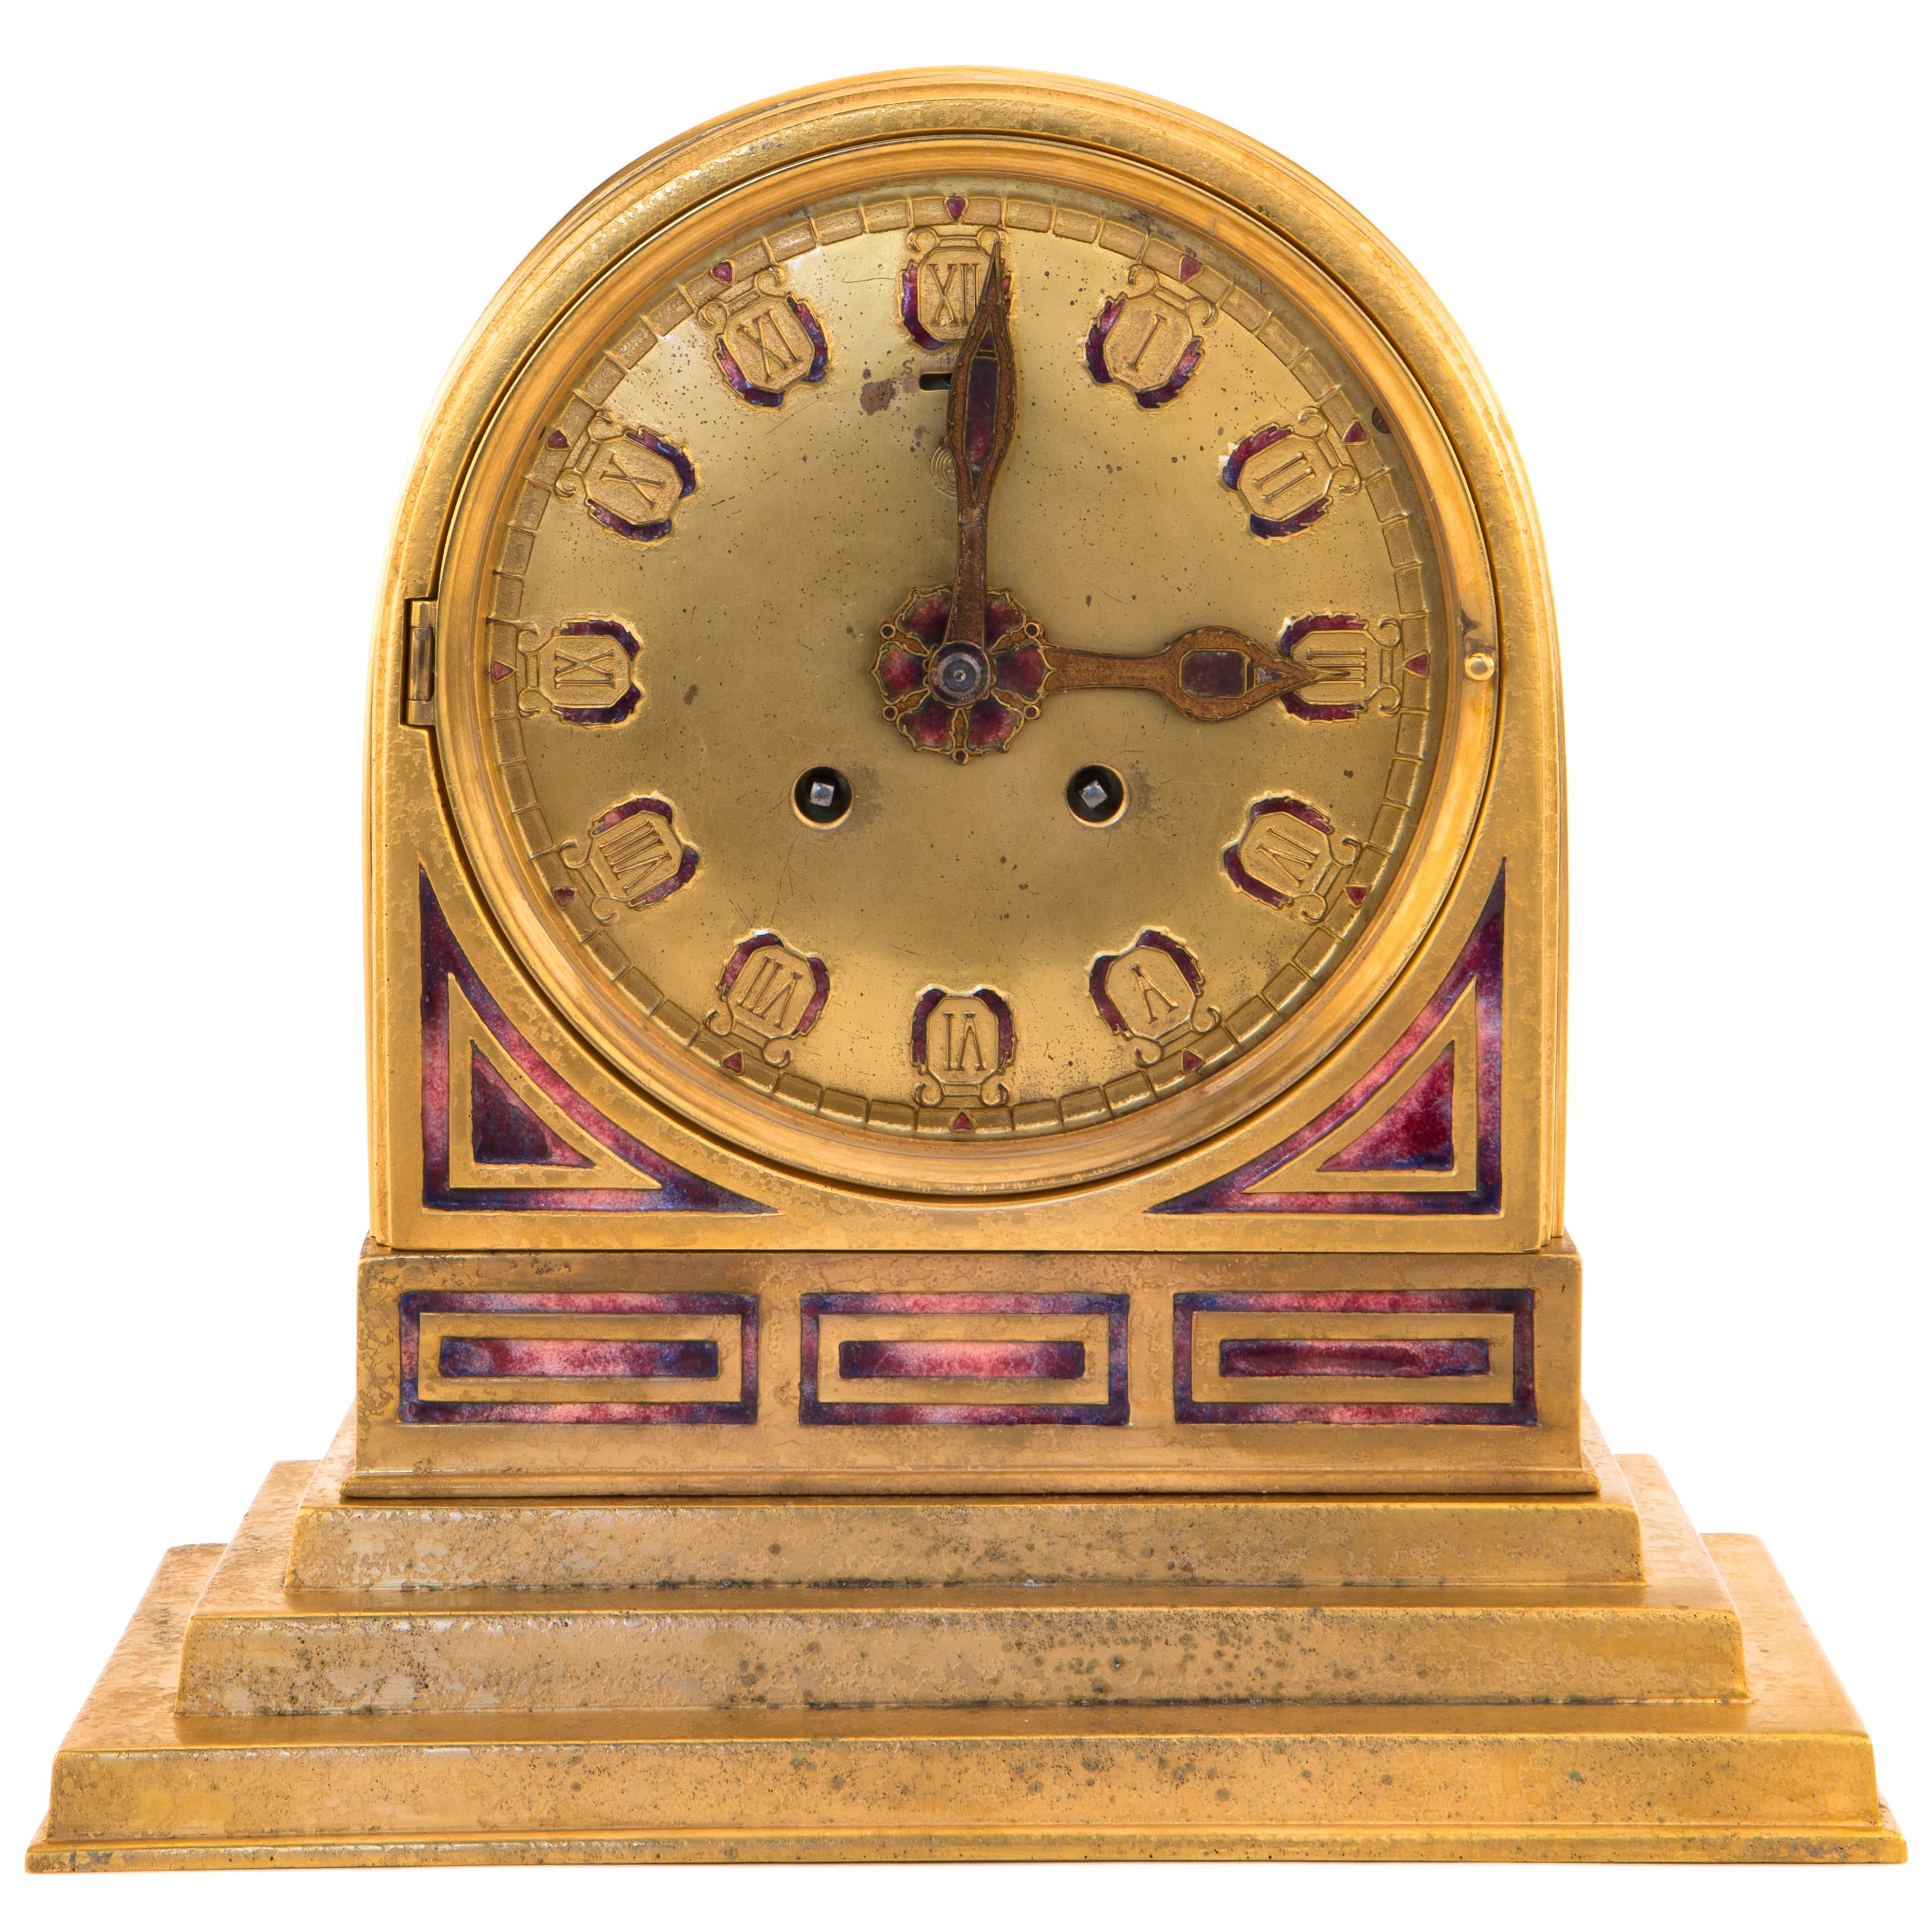 "Art Deco" Pattern Enameled and Bronze Mantle Clock by, Tiffany Studios